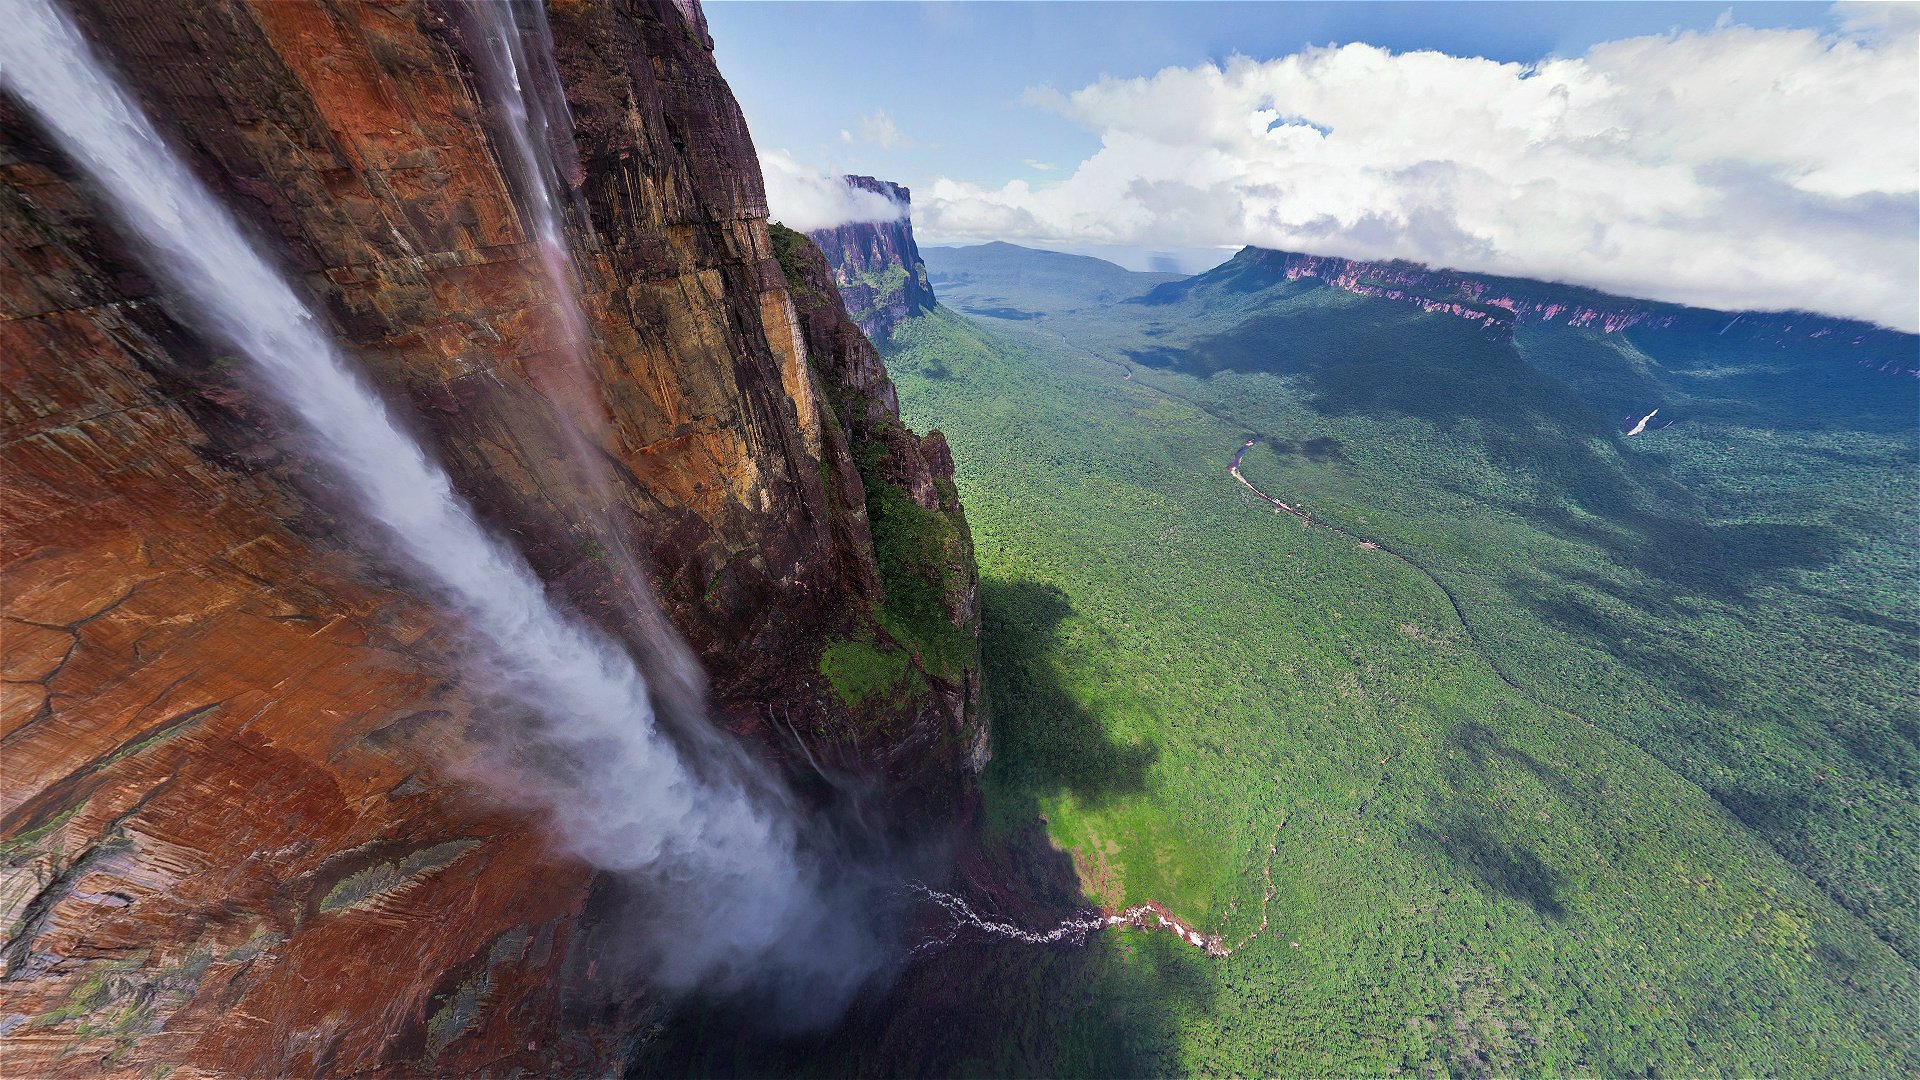 High waterfall with mountains, greenery and clouds